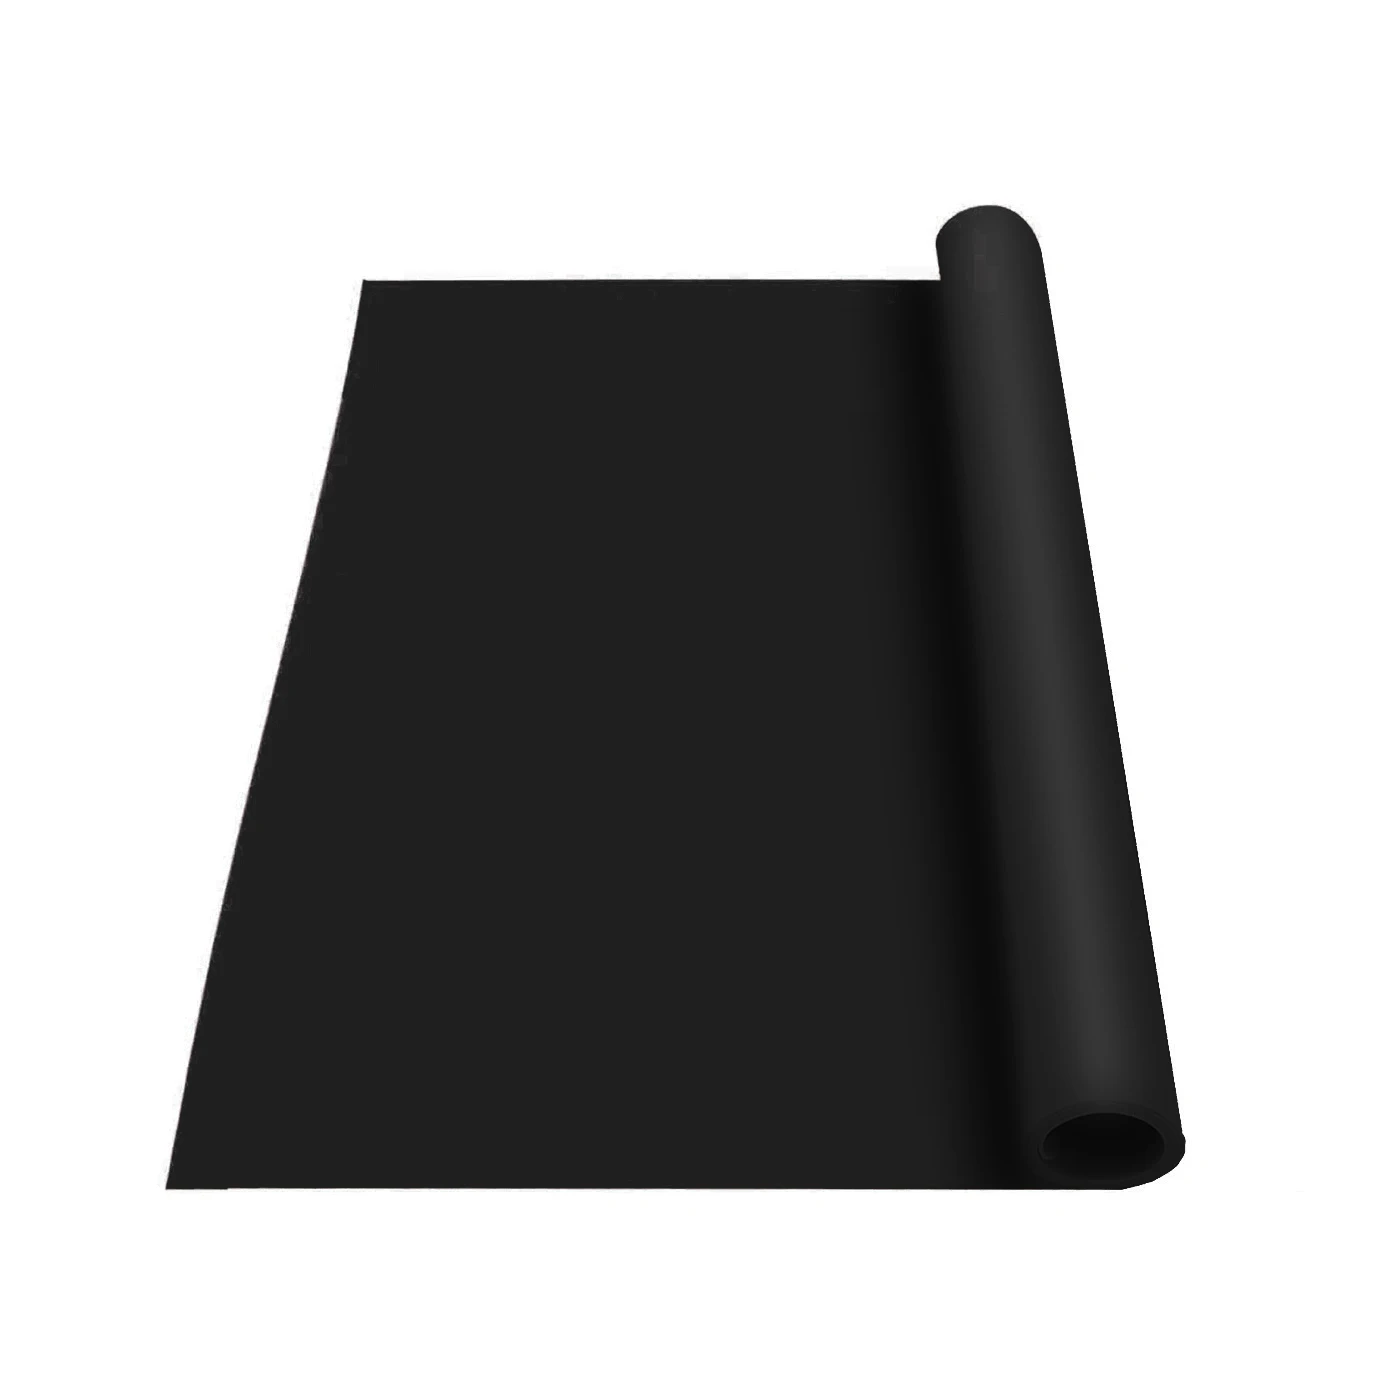 1mm Large Silicone Mat Placemat Vinyl Table Mat Heat Insulation Anti-Slip  Washable Kitchen Dining Dish Countertop Protector Pad